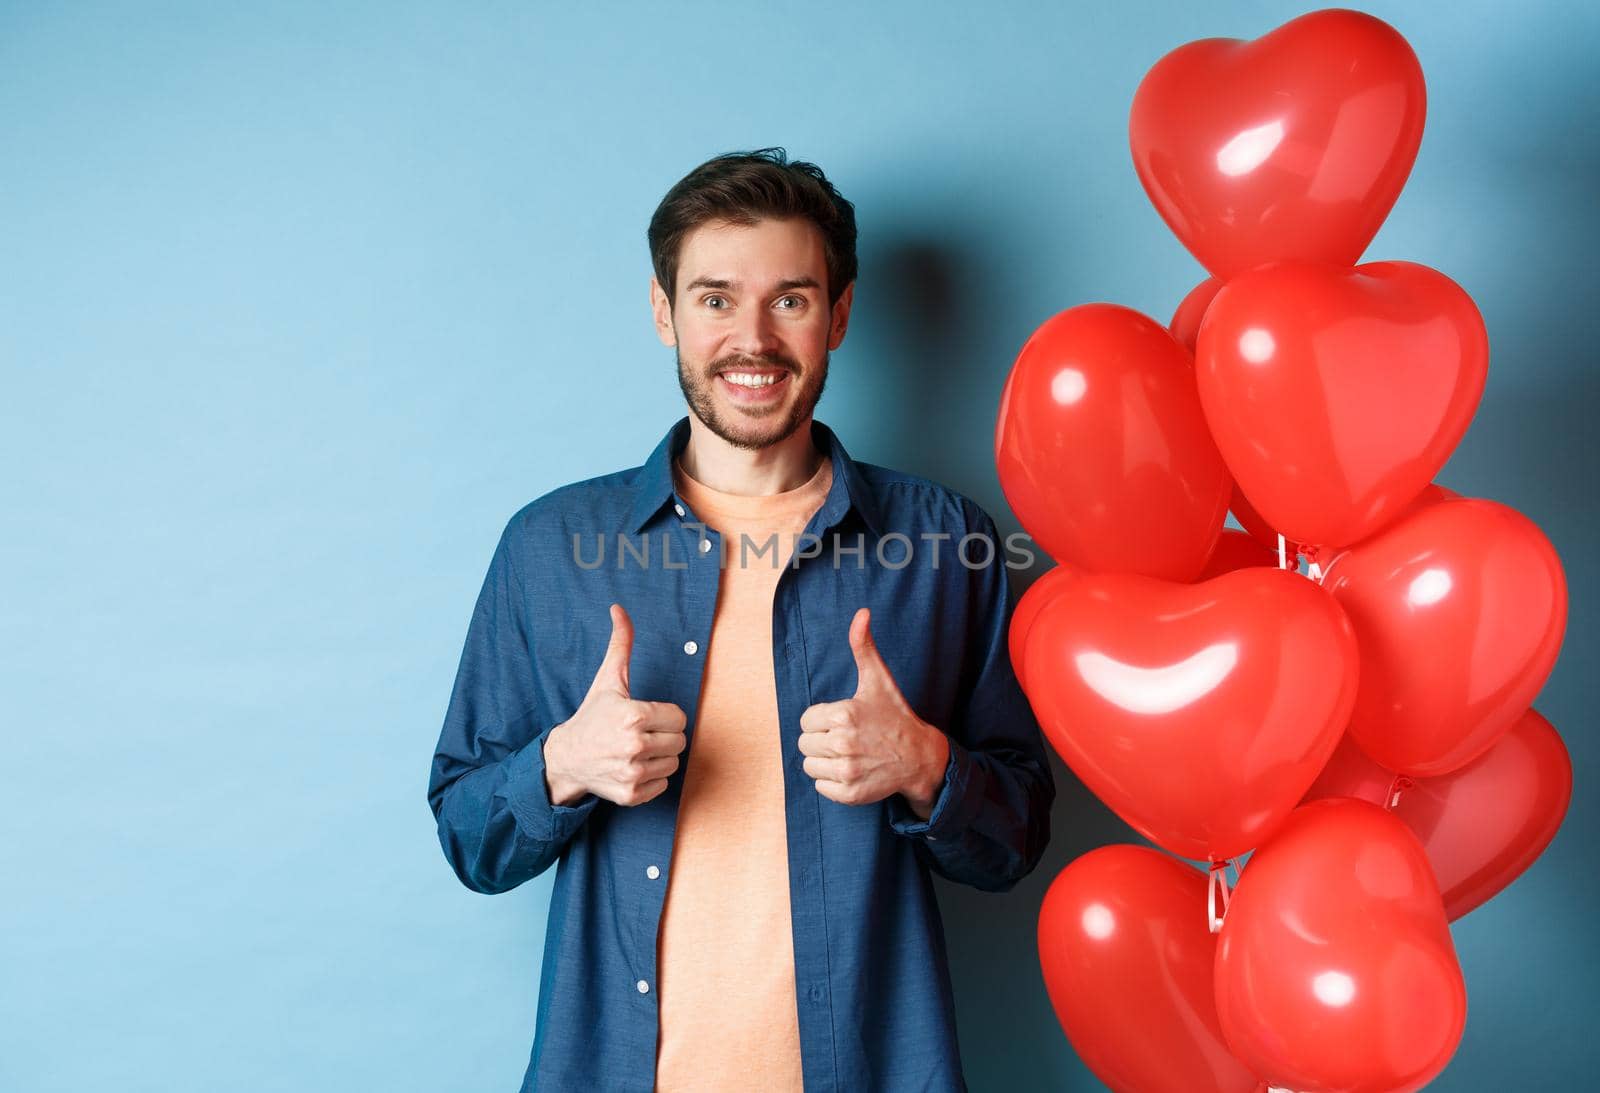 Happy valentines day. Cheerful boyfriend showing thumbs up in approval, standing with red hearts balloons for lover, blue background.